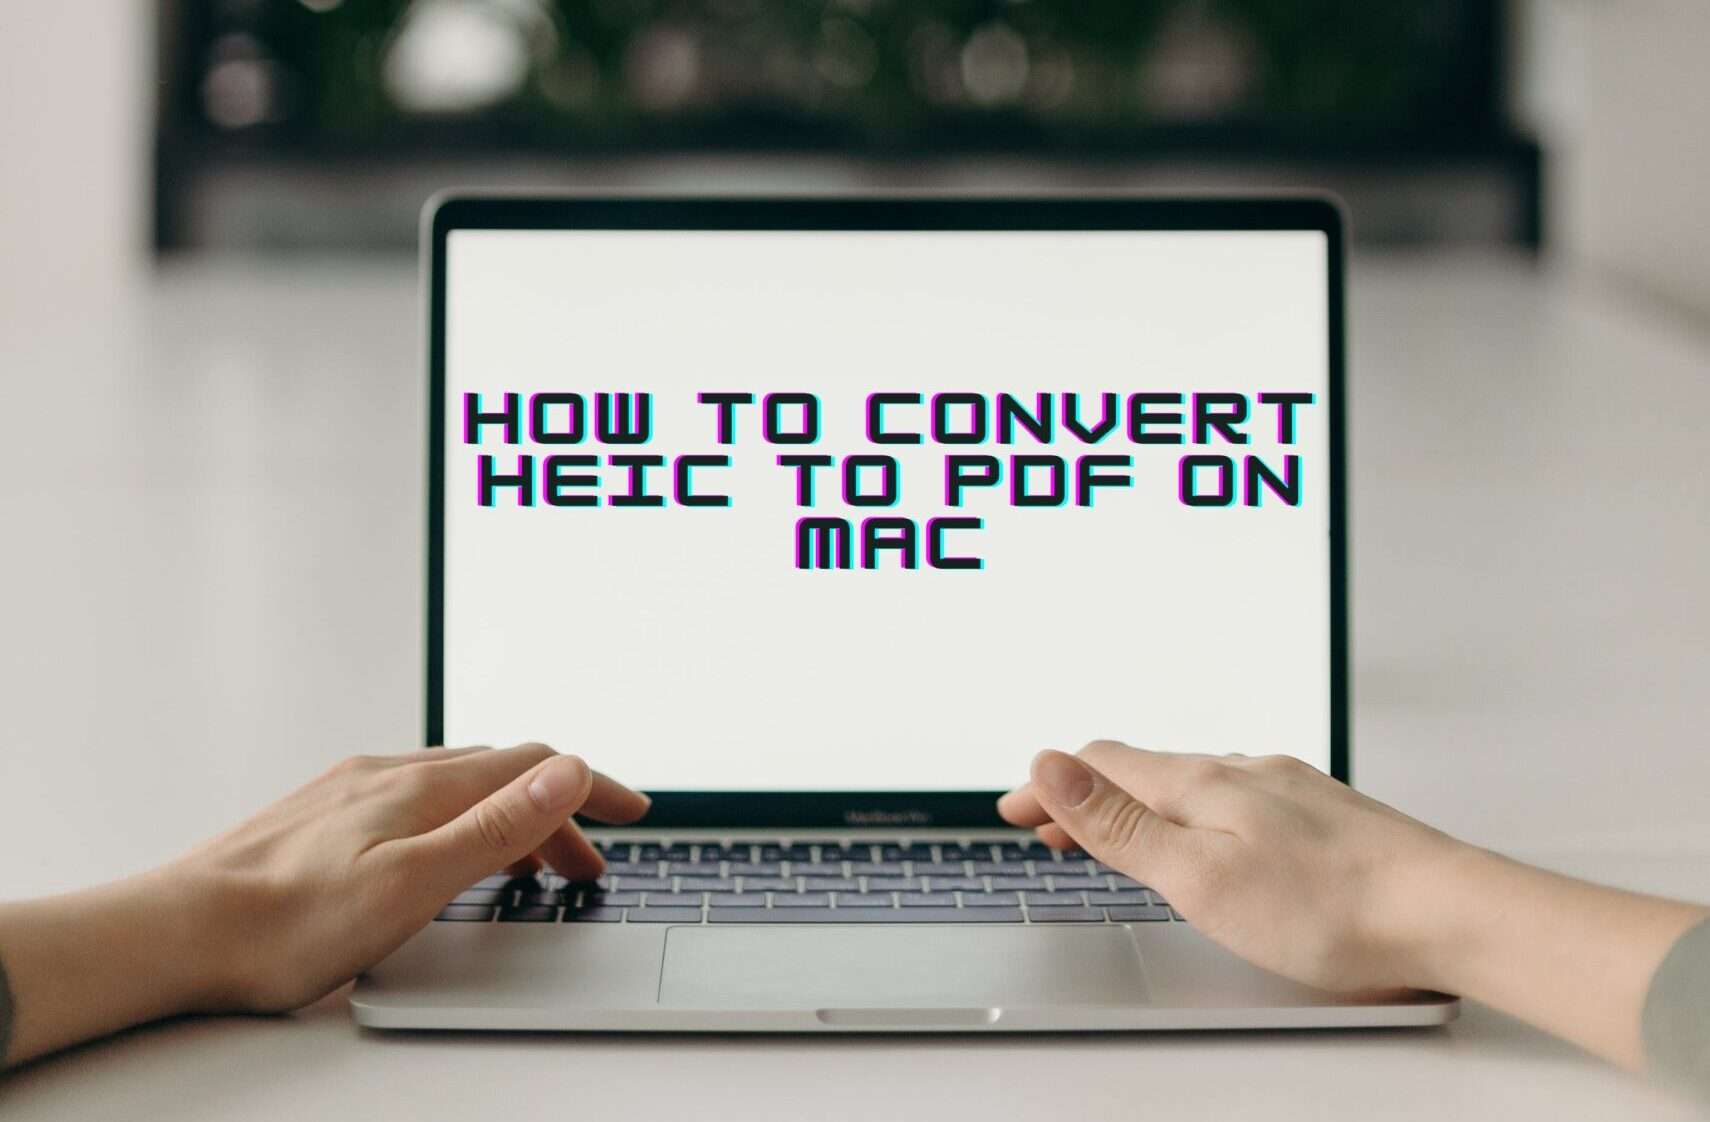 How to Convert HEIC to PDF on Mac